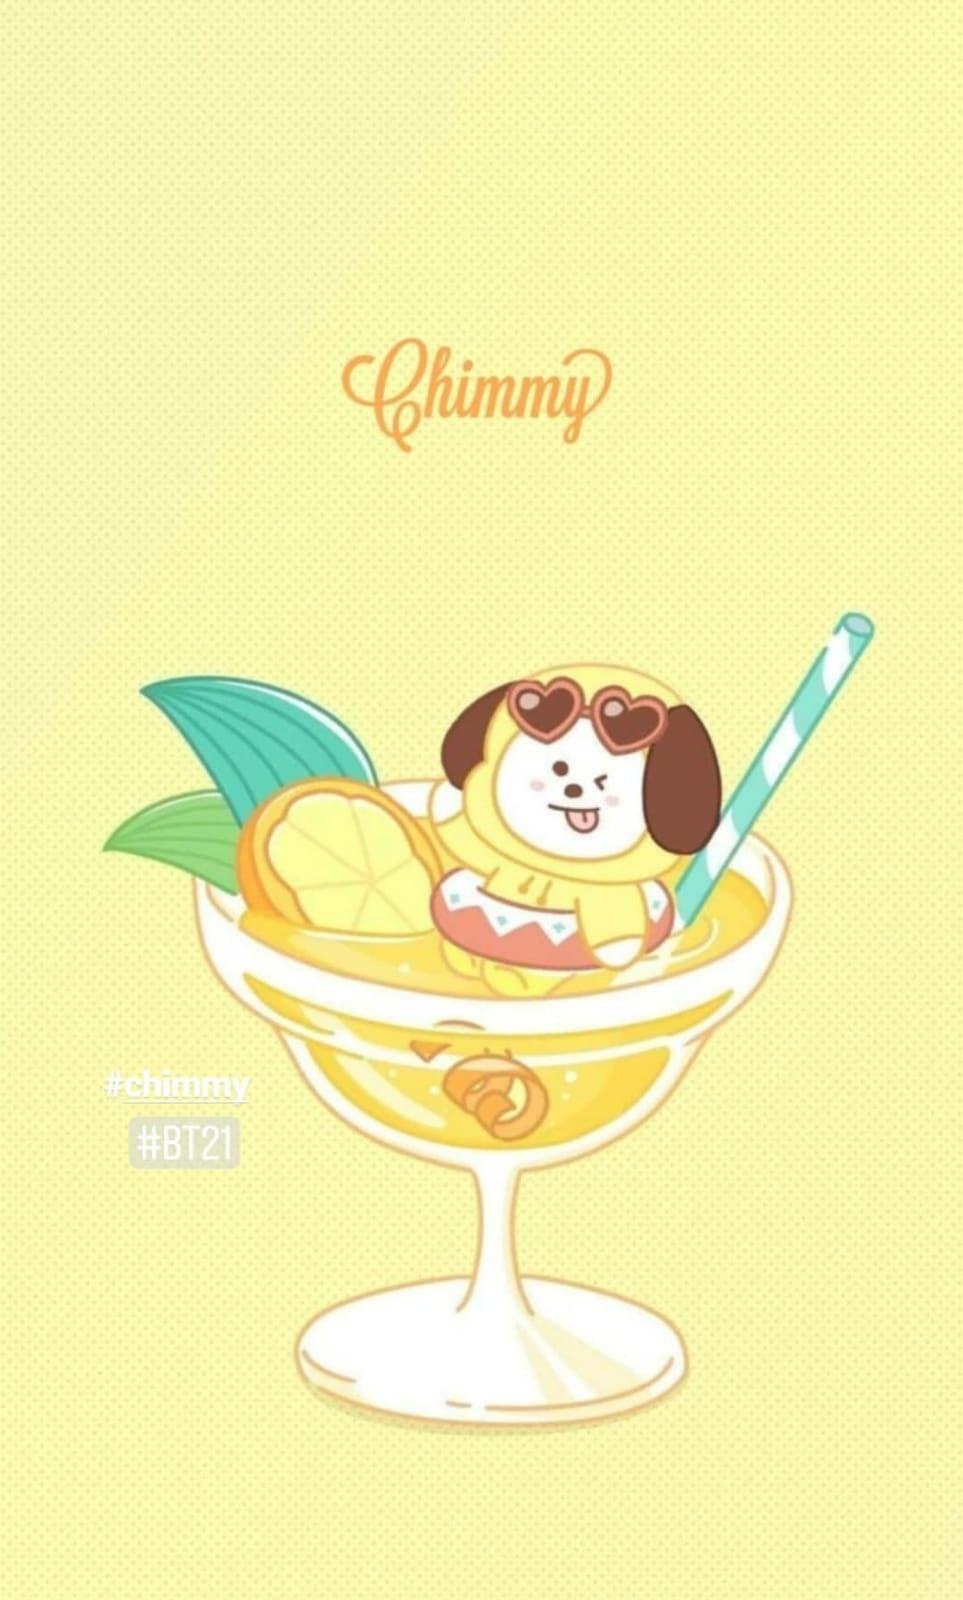 Chimmy Aesthetic Wallpapers Wallpaper Cave Bts wallpaper lyrics neon wallpaper aesthetic pastel wallpaper wallpaper iphone cute tumblr view aesthetic bt21 chimmy cute wallpaper background. chimmy aesthetic wallpapers wallpaper